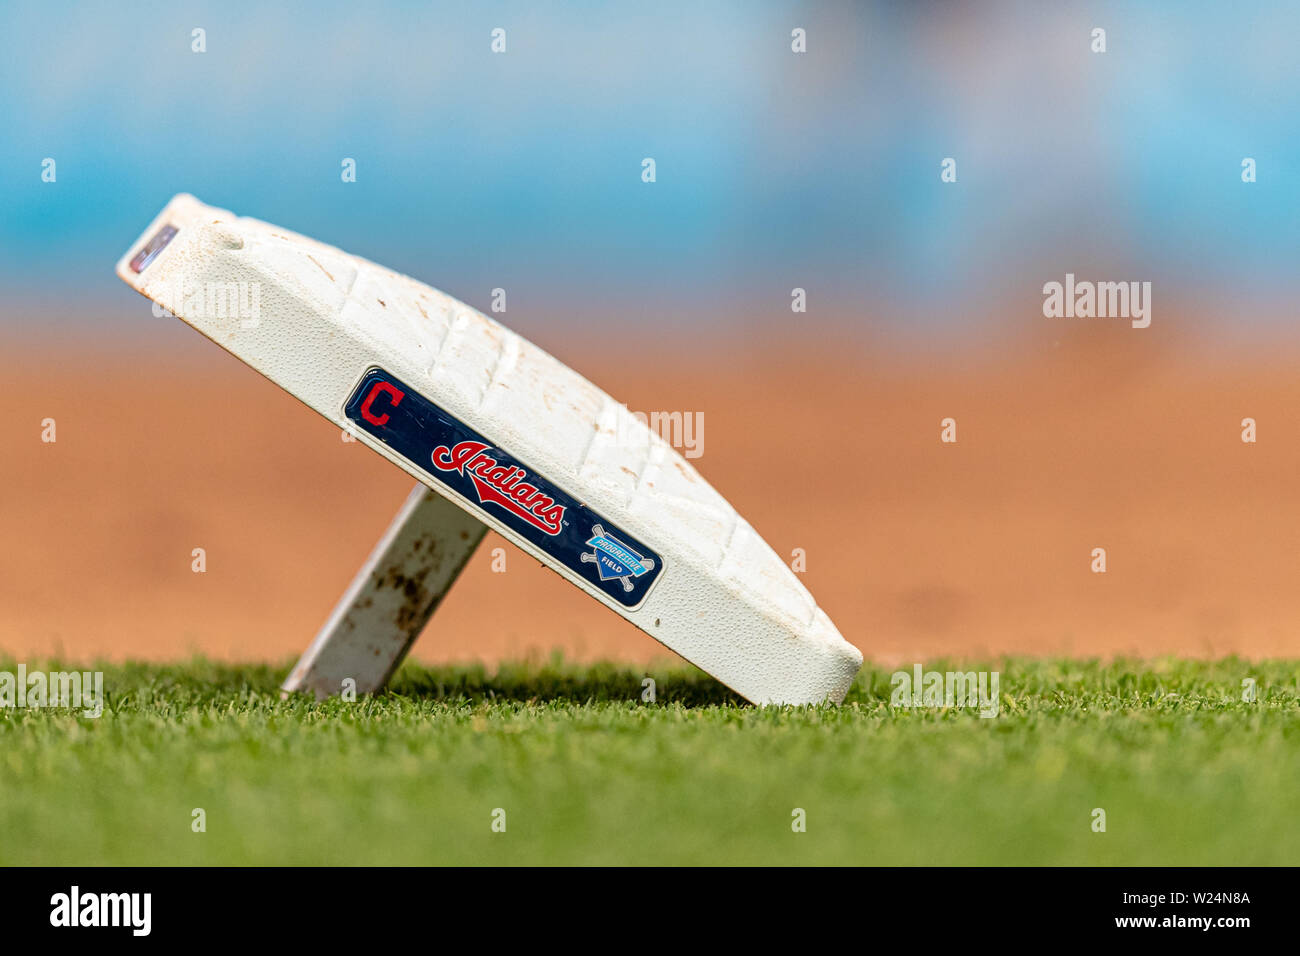 Cleveland, OH, USA. 16th May, 2019. A detailed view of the Cleveland Indians and Progressive field logos are seen on third base during a game between the Baltimore Orioles and the Cleveland Indians on May 16, 2019 at Progressive Field in Cleveland, OH. Adam Lacy/CSM/Alamy Live News Stock Photo